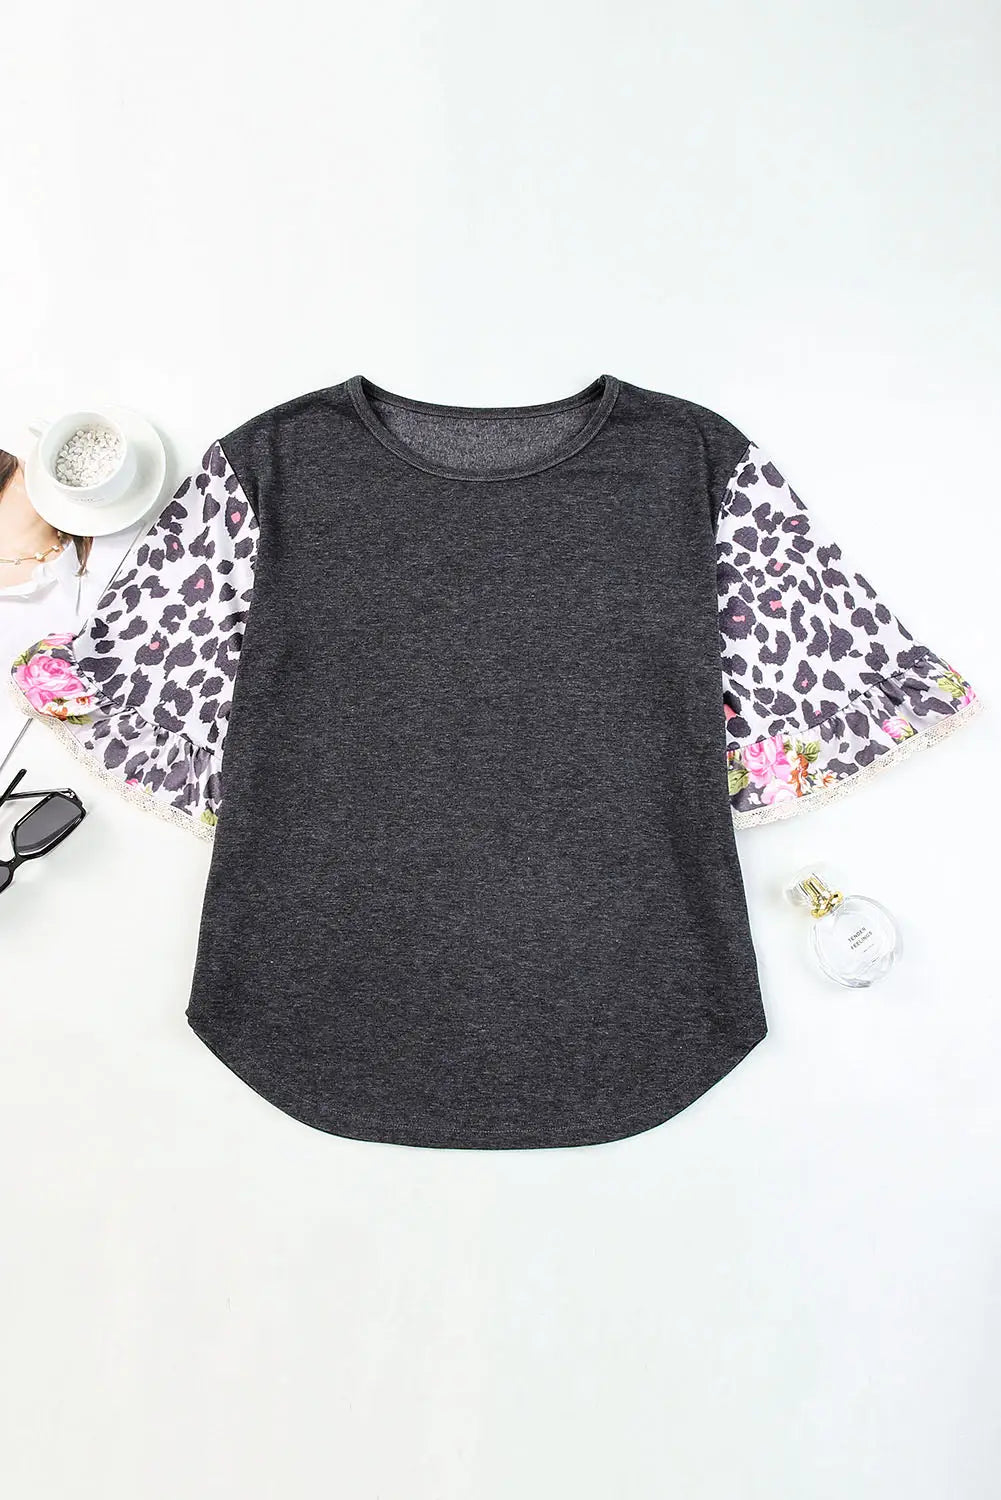 Black ruffle bell sleeve leopard floral patchwork top - t-shirts